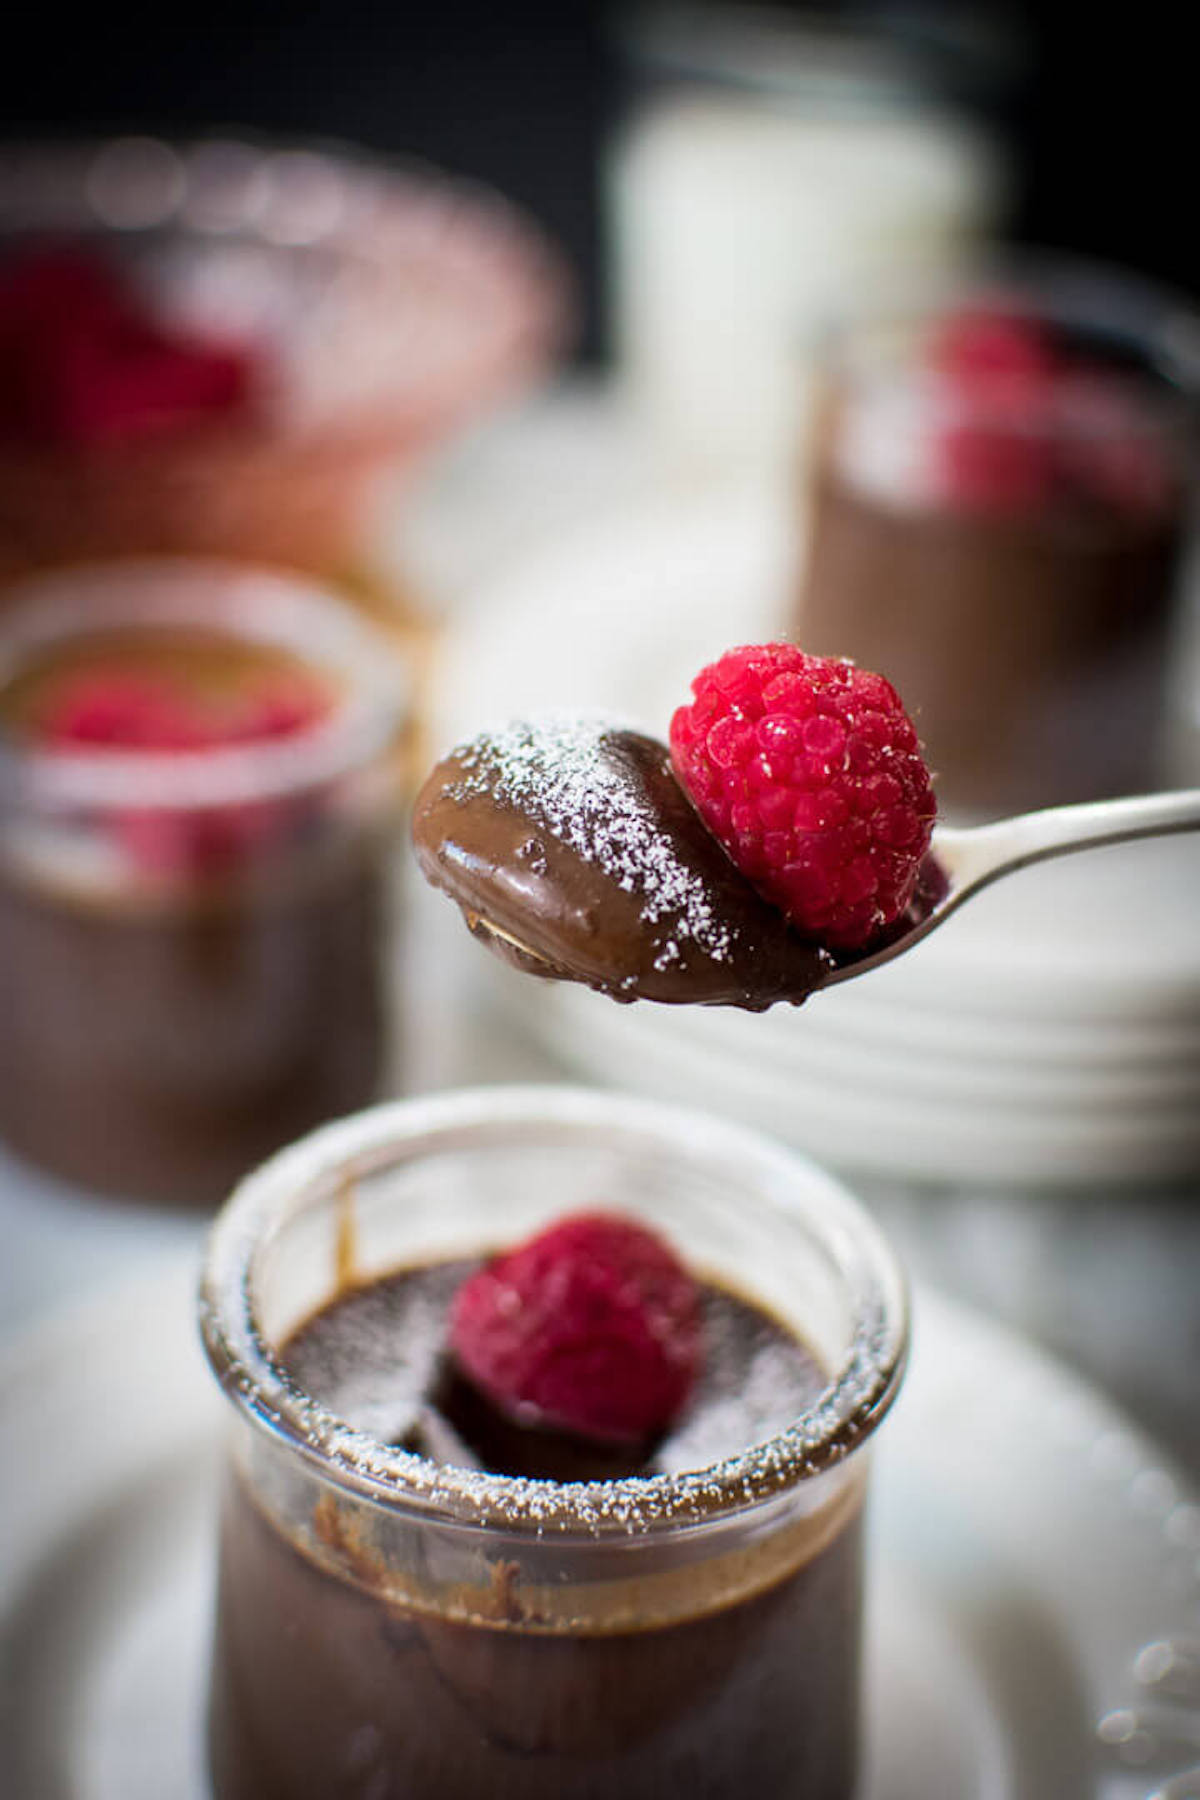 Closeup of a spoonful of chocolate dessert with a raspberry on top, sprinkled with powdered sugar.